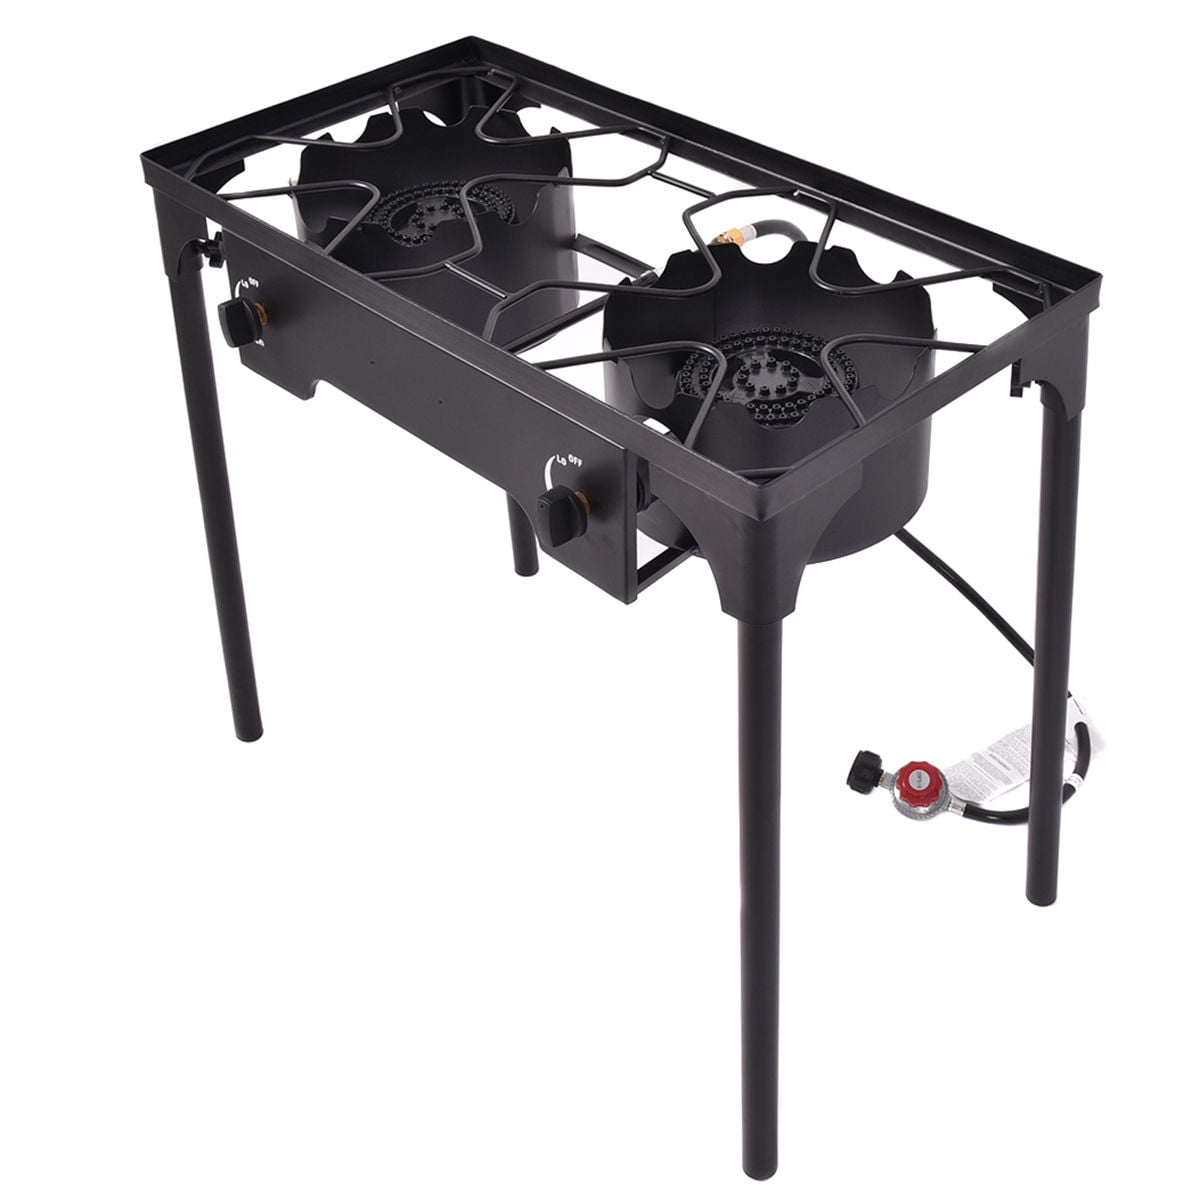 High Flame Outdoor Stove Cooker Automatic Ignition Complete with CSA Approved Hose & Regulator Heavy Duty Cast Iron Portable Camp Outdoor Stove Propane Gas Burner with Wind Stand 